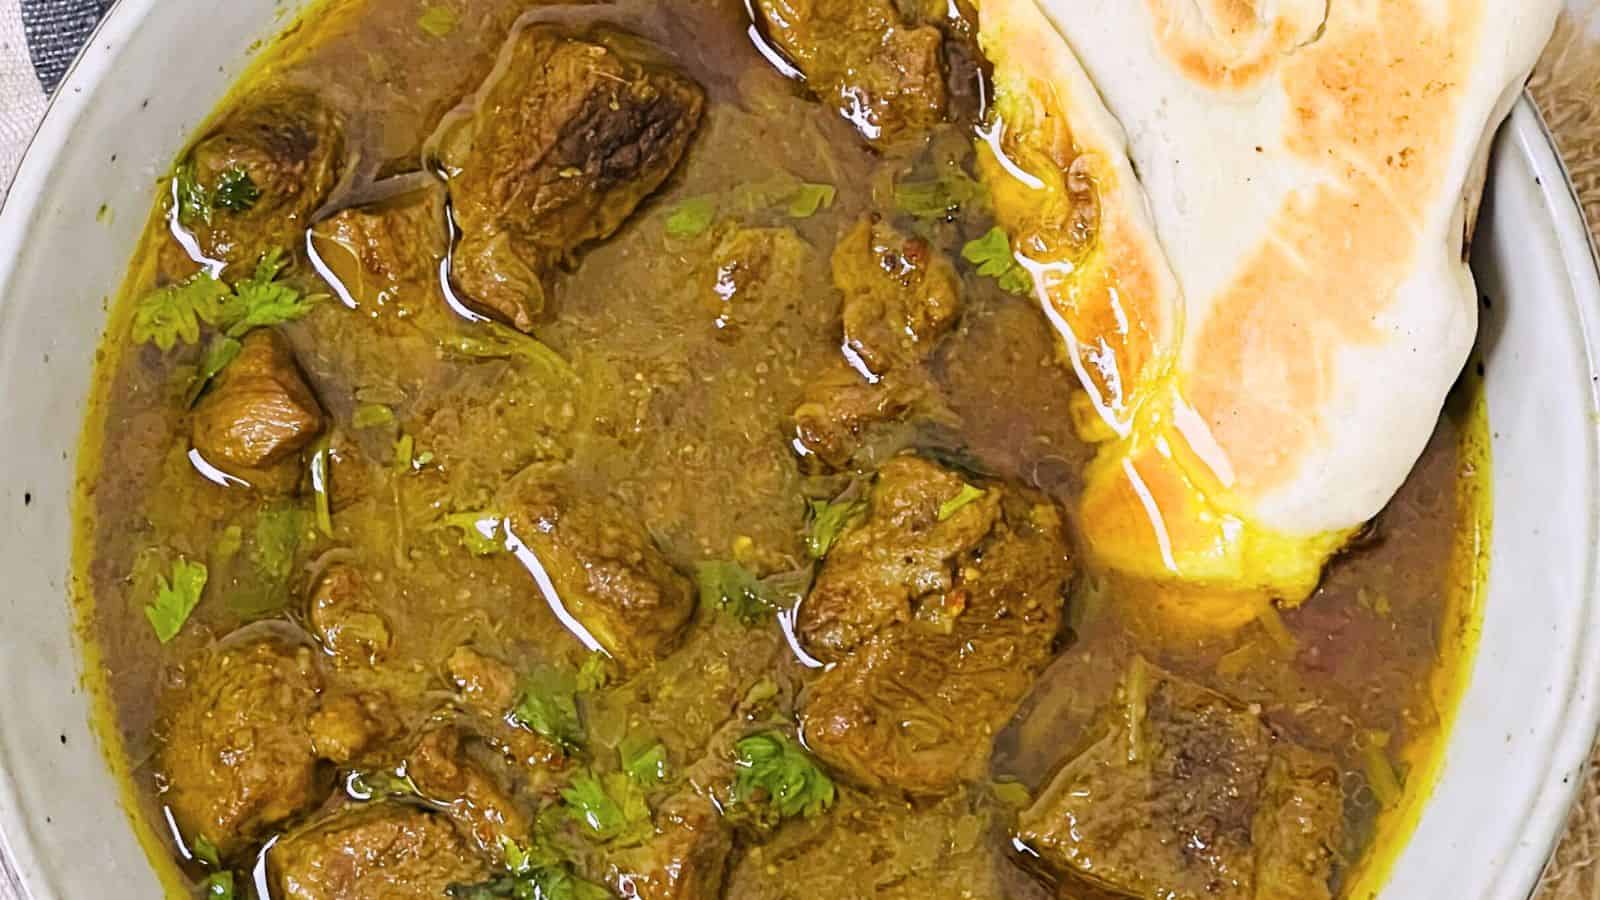 A bowl of rich beef curry garnished with cilantro, accompanied by a piece of naan bread partially dipped in the sauce.